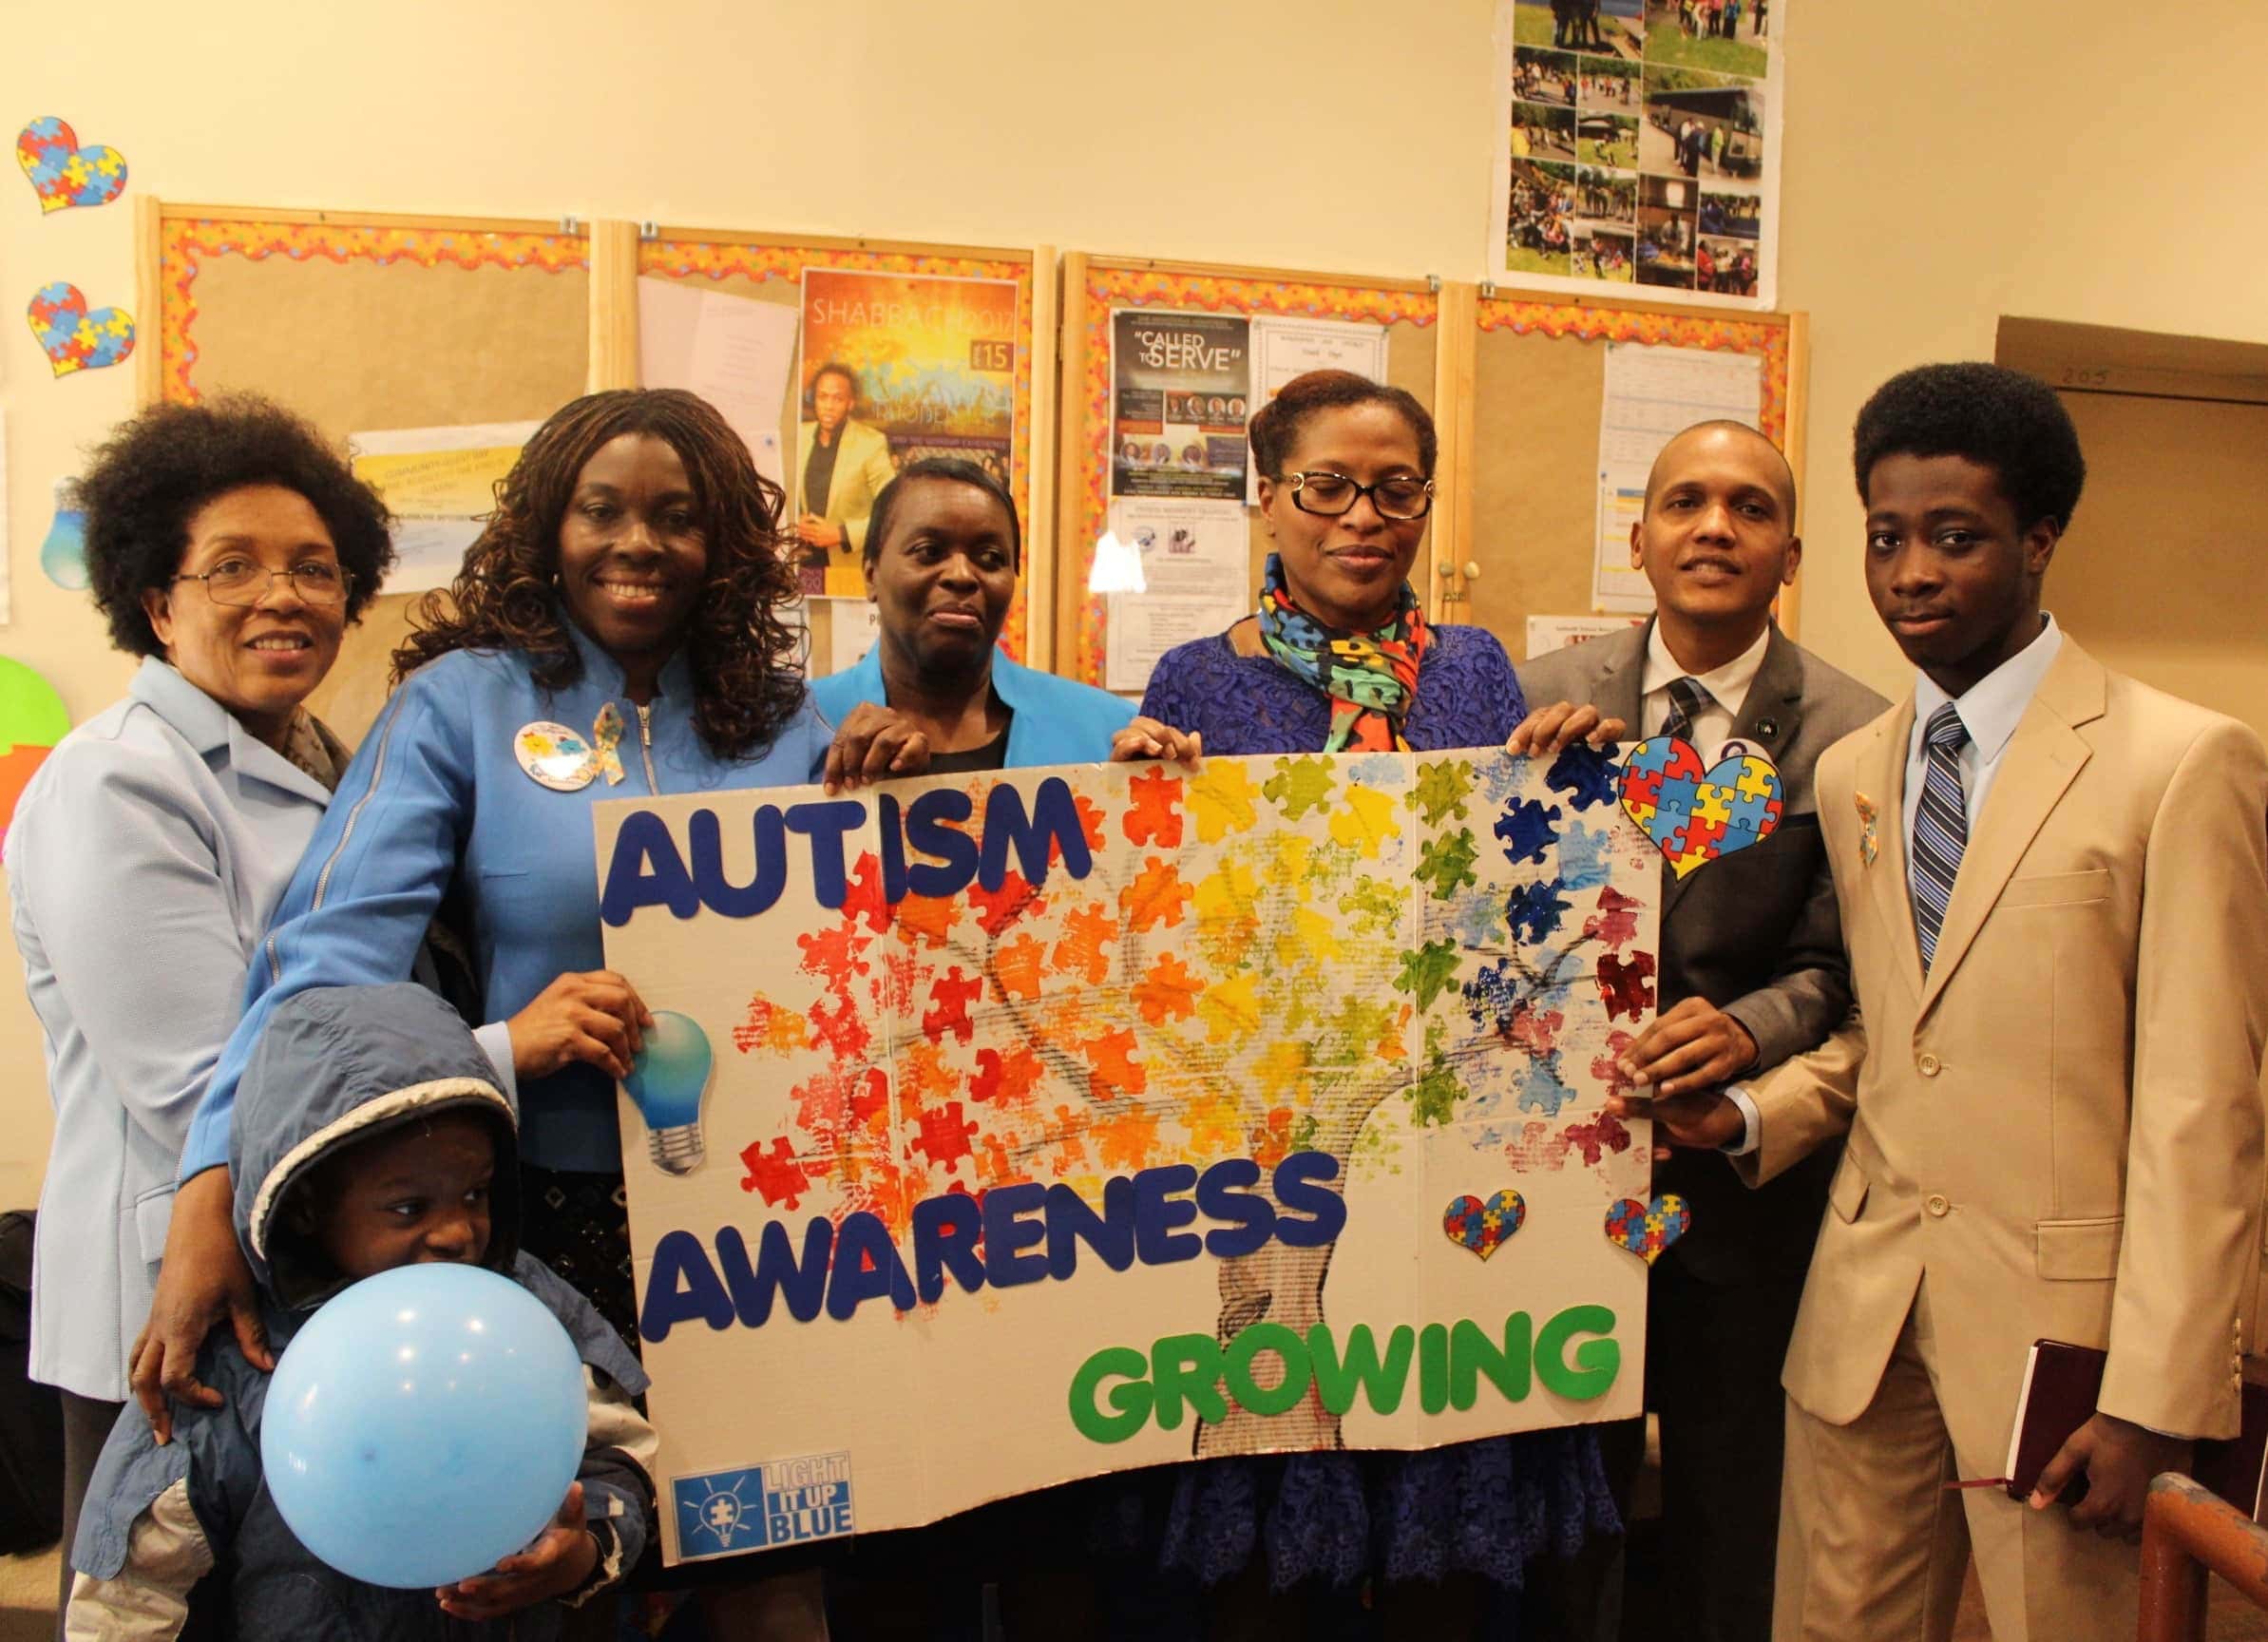 From left, standing and holding a sign about autism awareness are Cheryl Silvera, Greater New York Conference Disabilities Ministries coordinator; Everette B. Samuel, Maranatha church associate pastor; Jennifer Craig-Clarke, Maranatha church member; Udene Slater, Berean church member; Manuel Rosario, Greater New York Conference Sabbath School and Personal Ministries director; and Ayinde Nelson, Maranatha church member. [Photo: Atlantic Union Gleaner]